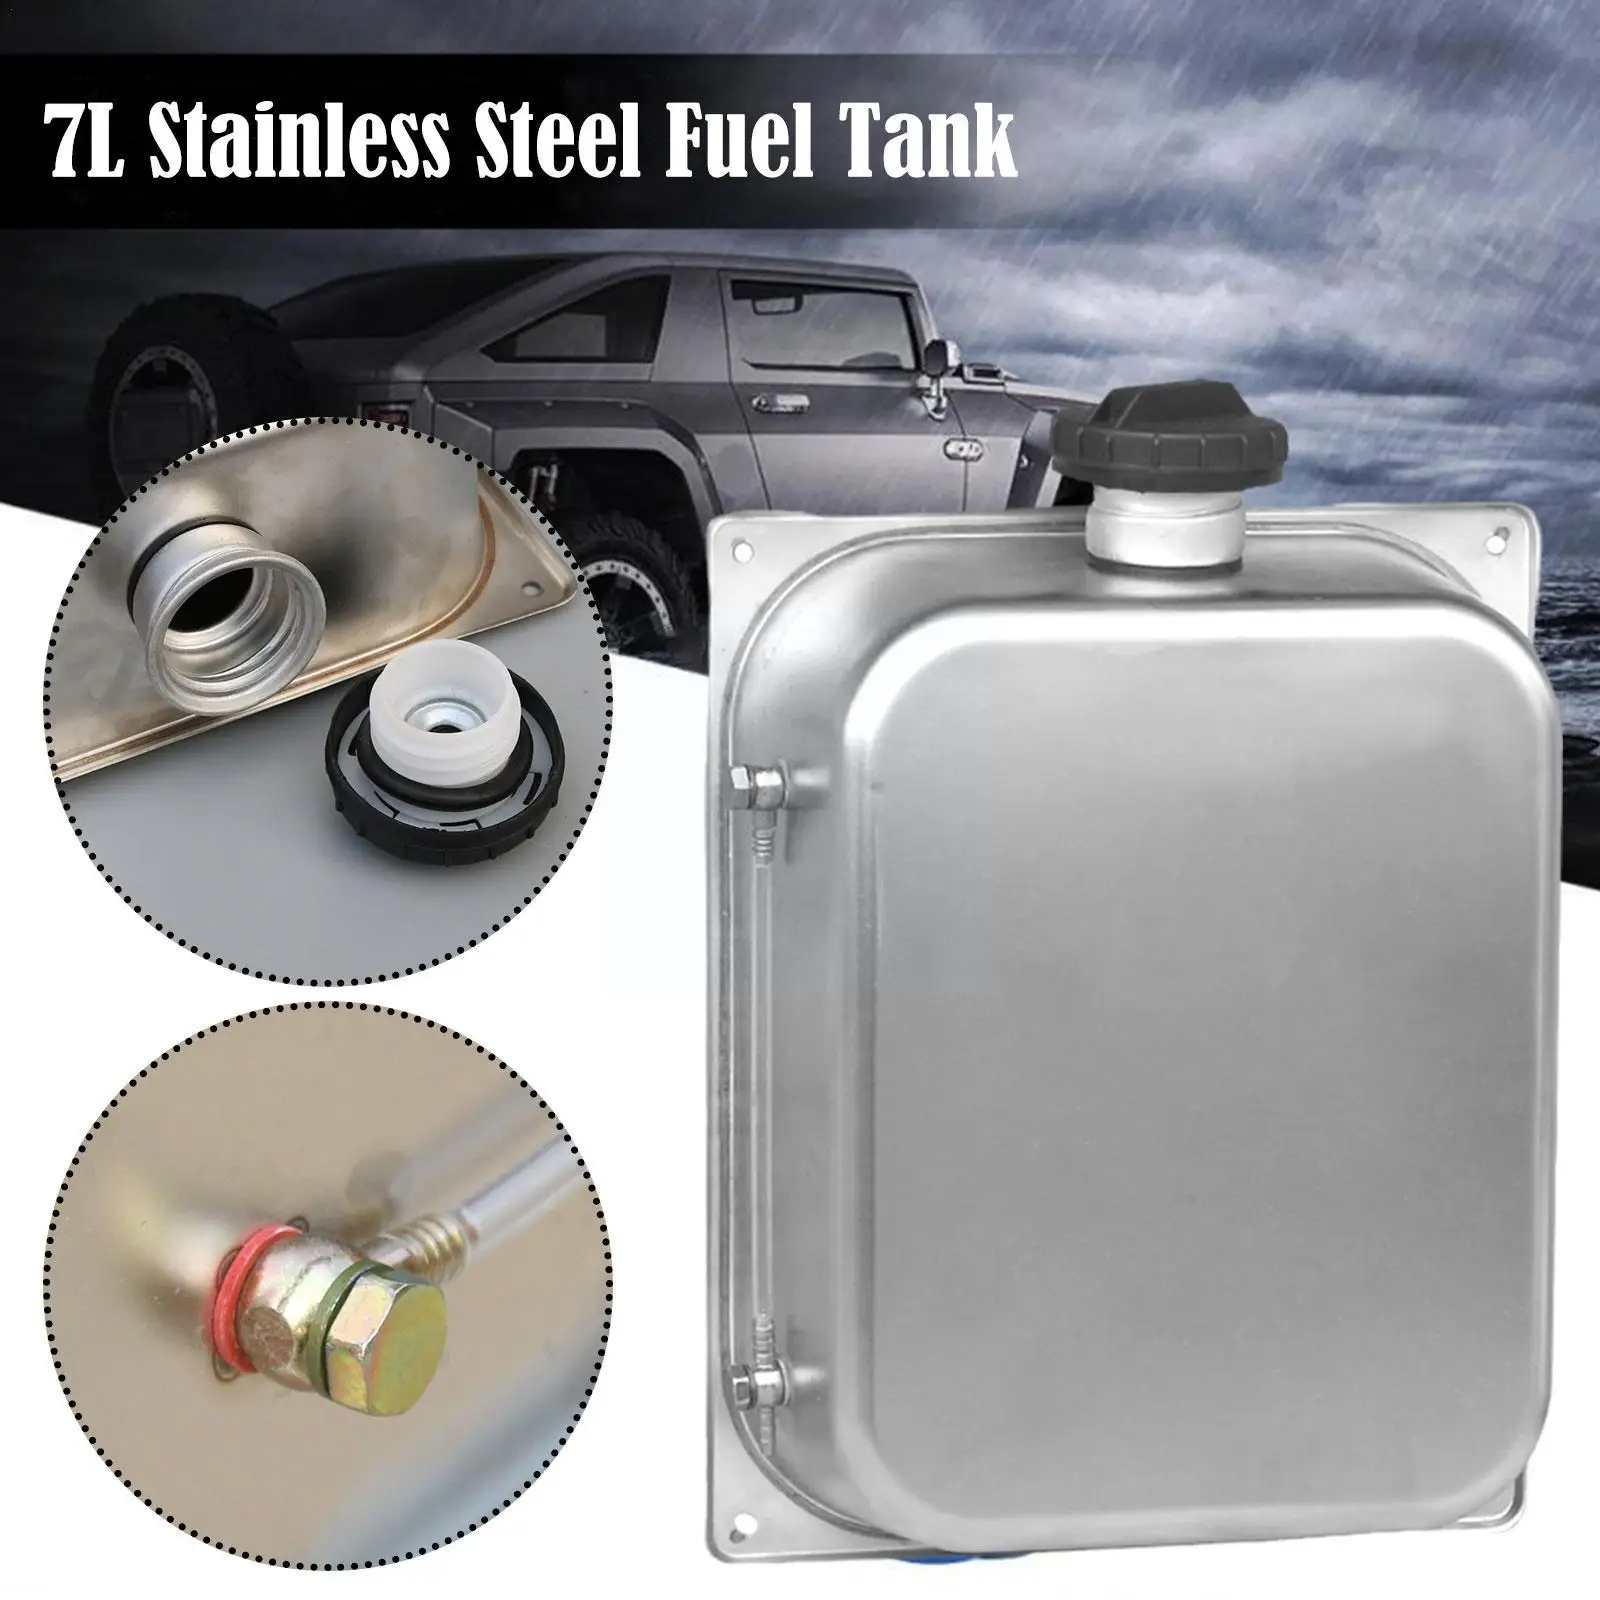 

7L Stainless Steel Gasoline Petrol Fuel Tank Can Fit For Webasto Eberspacher Universal Heater Car Accessories Fuel Tank D4F2